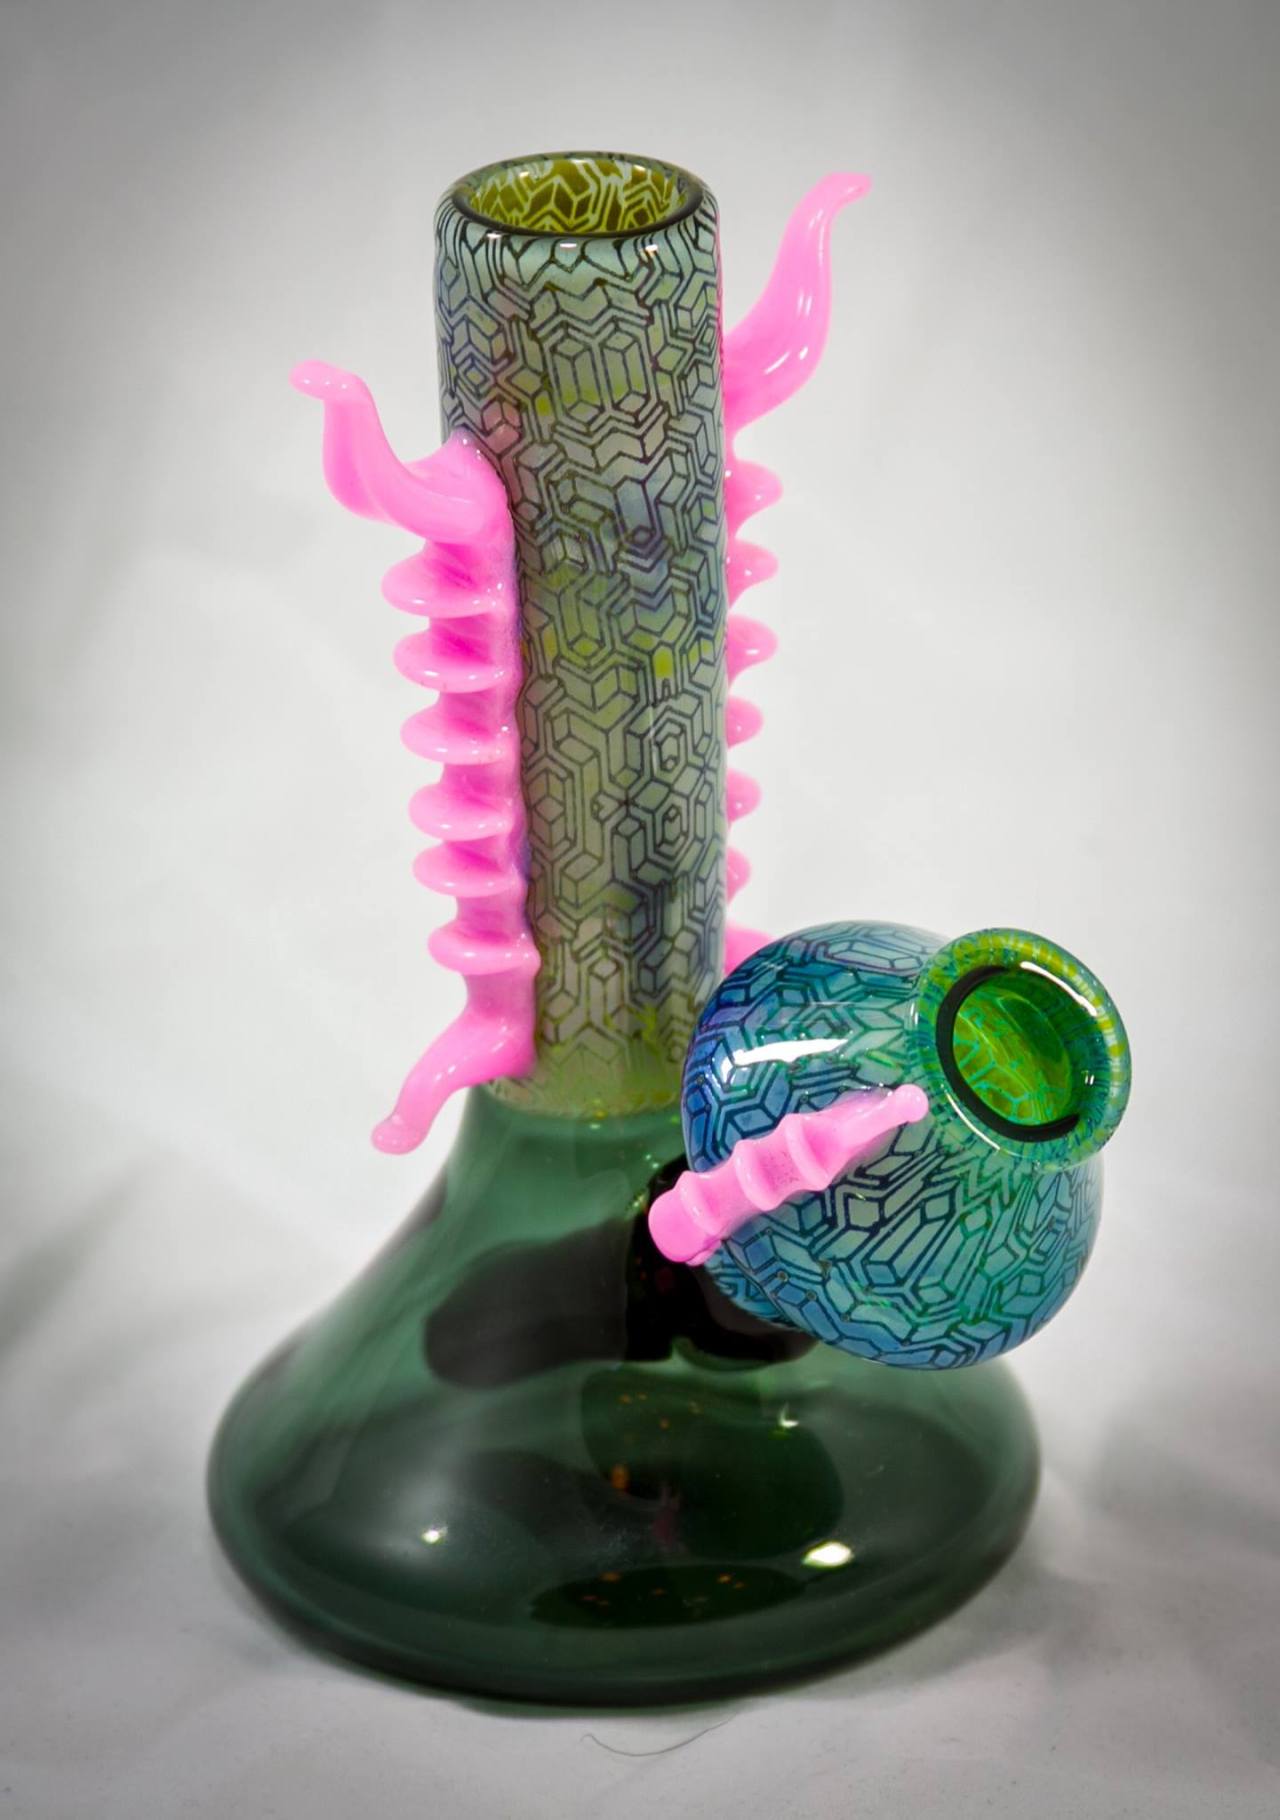 whospilledthebongwater:  headshopgirl:  Kind Available from Piece of Mind Bend Head